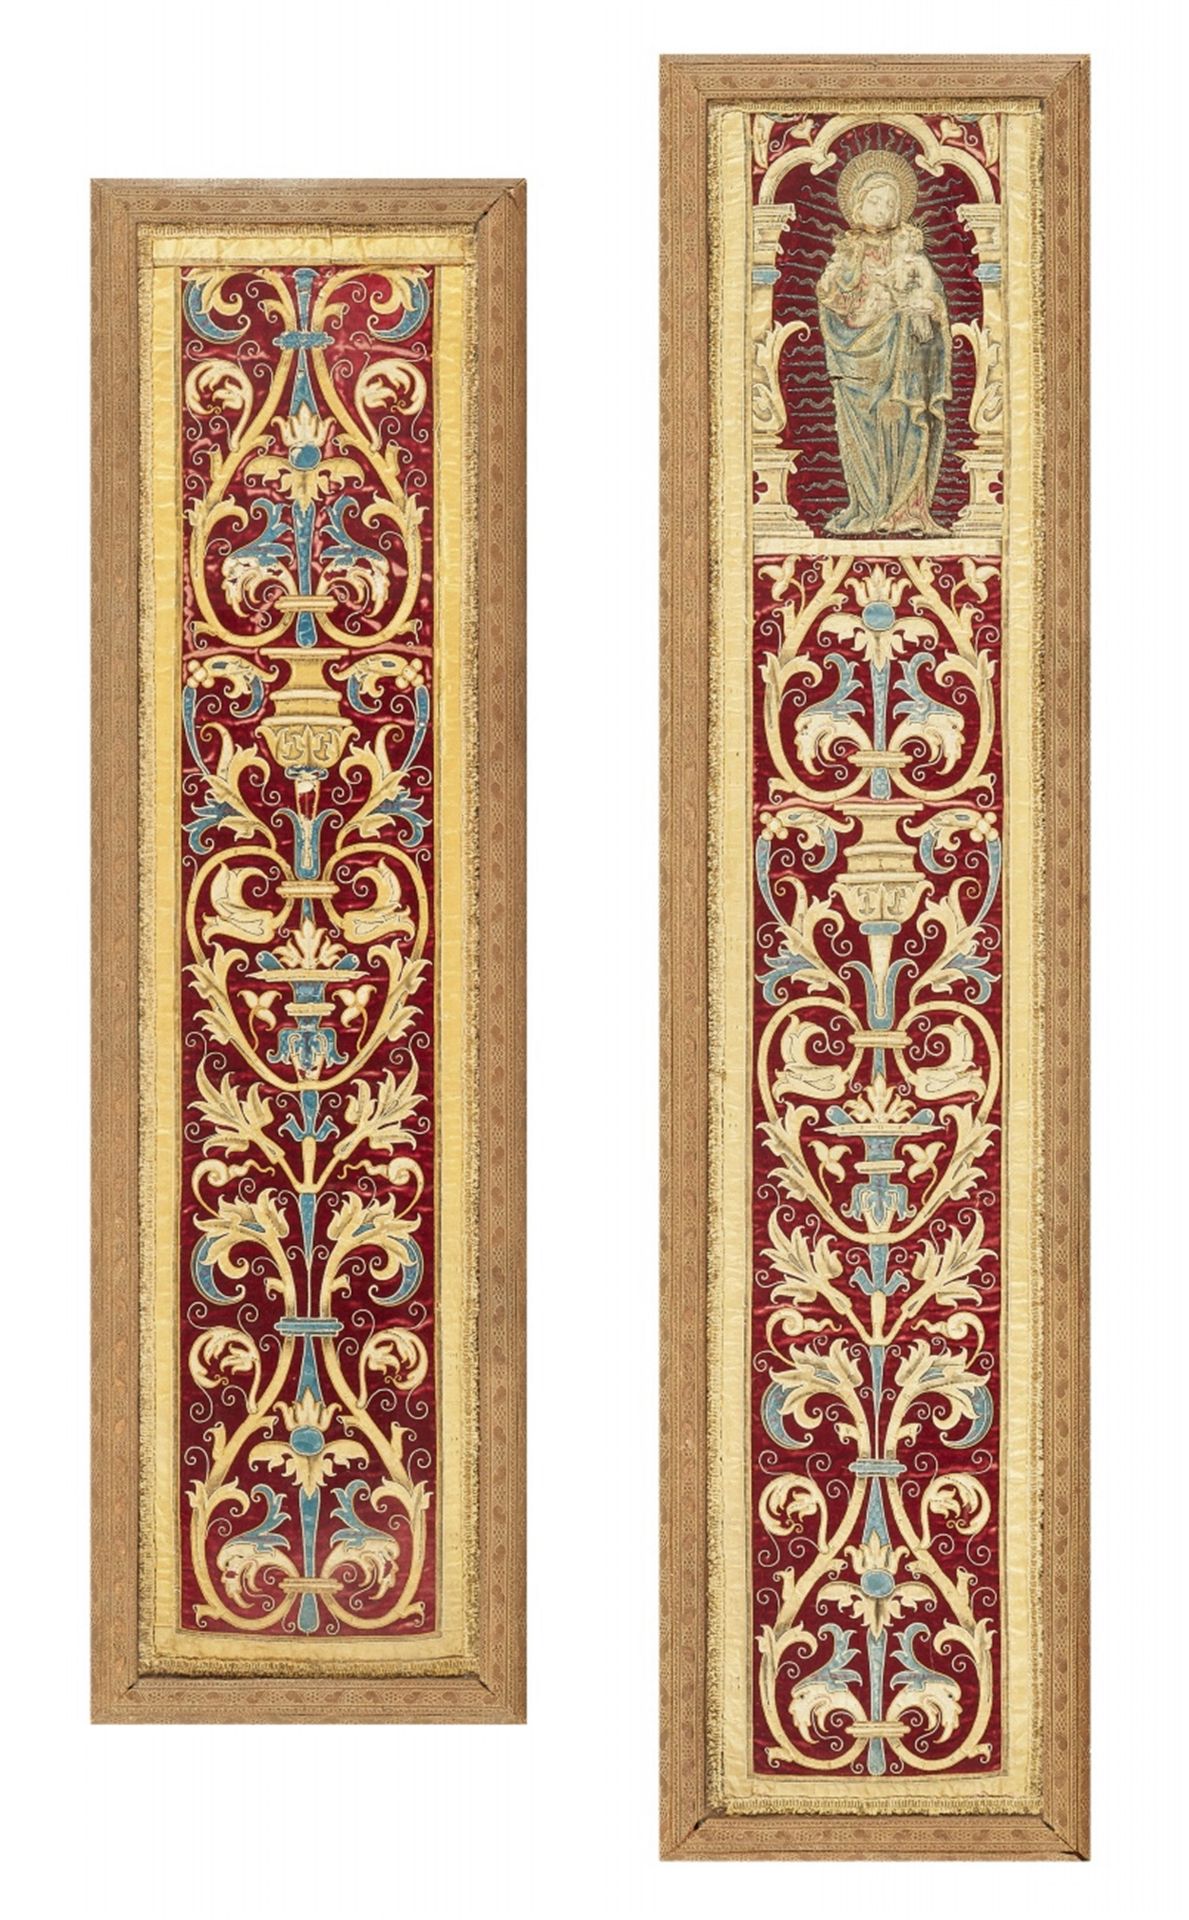 Two Spanish embroidered borders